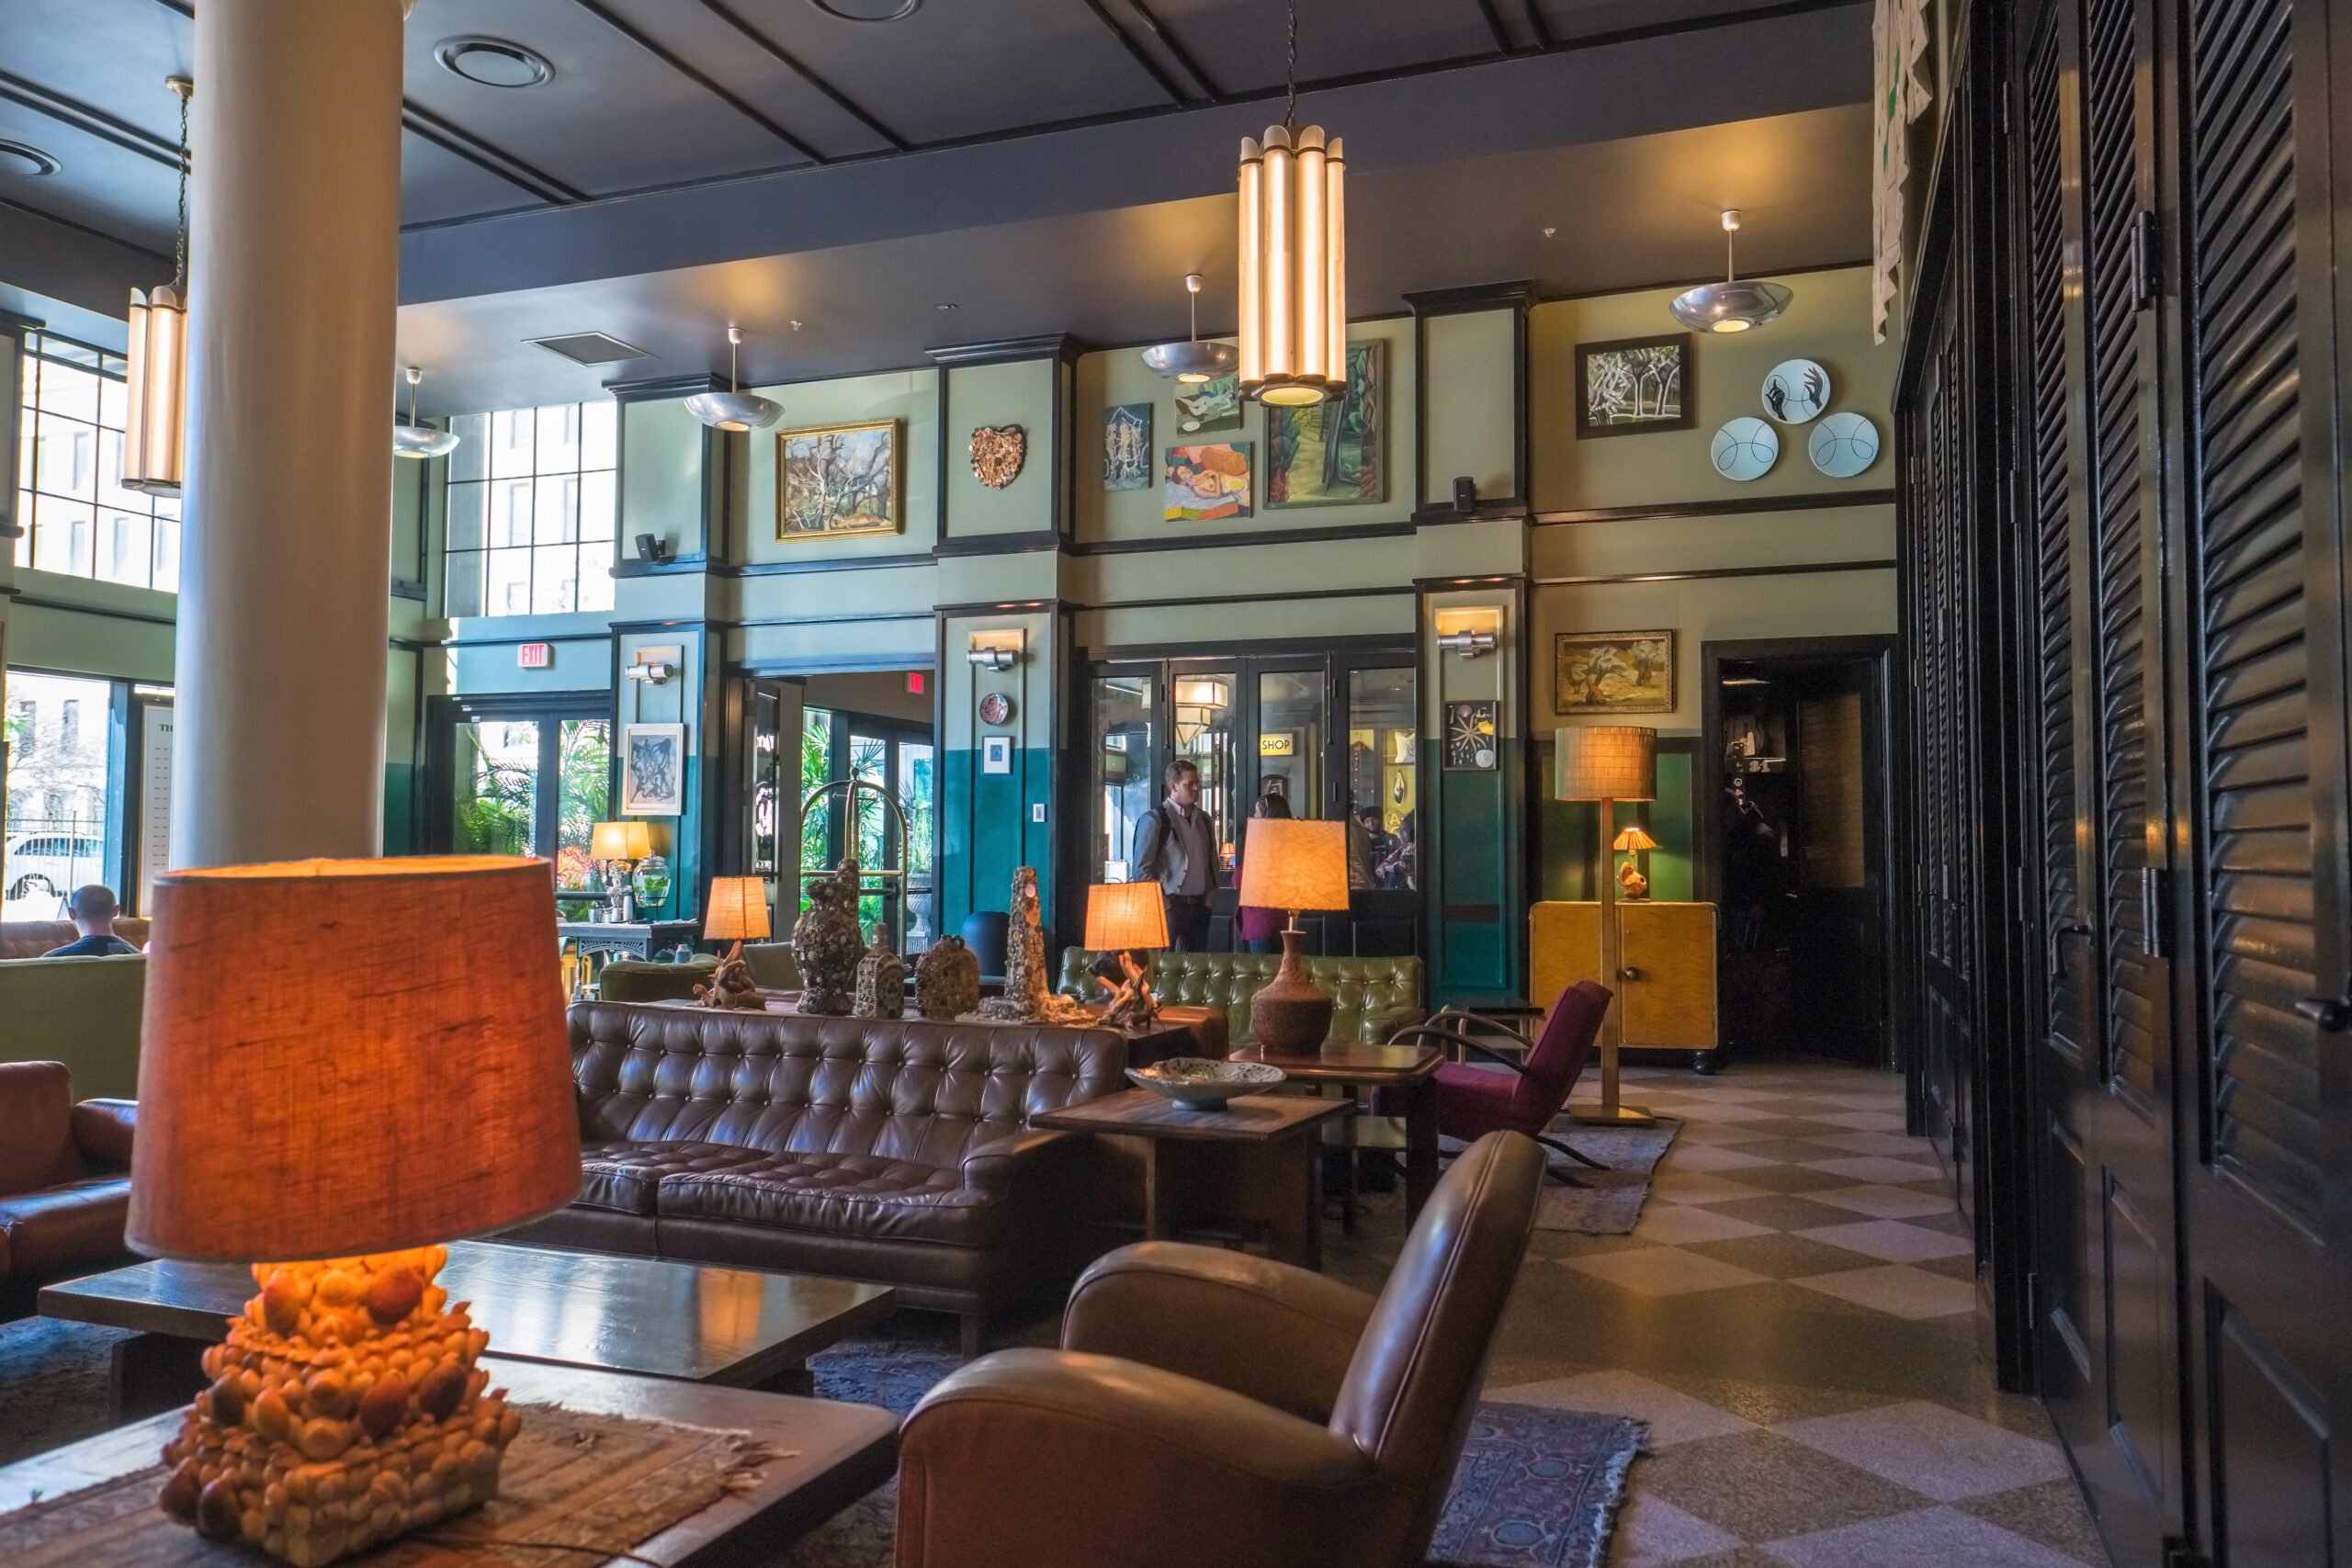 Lobby of the Ace Hotel, New Orleans